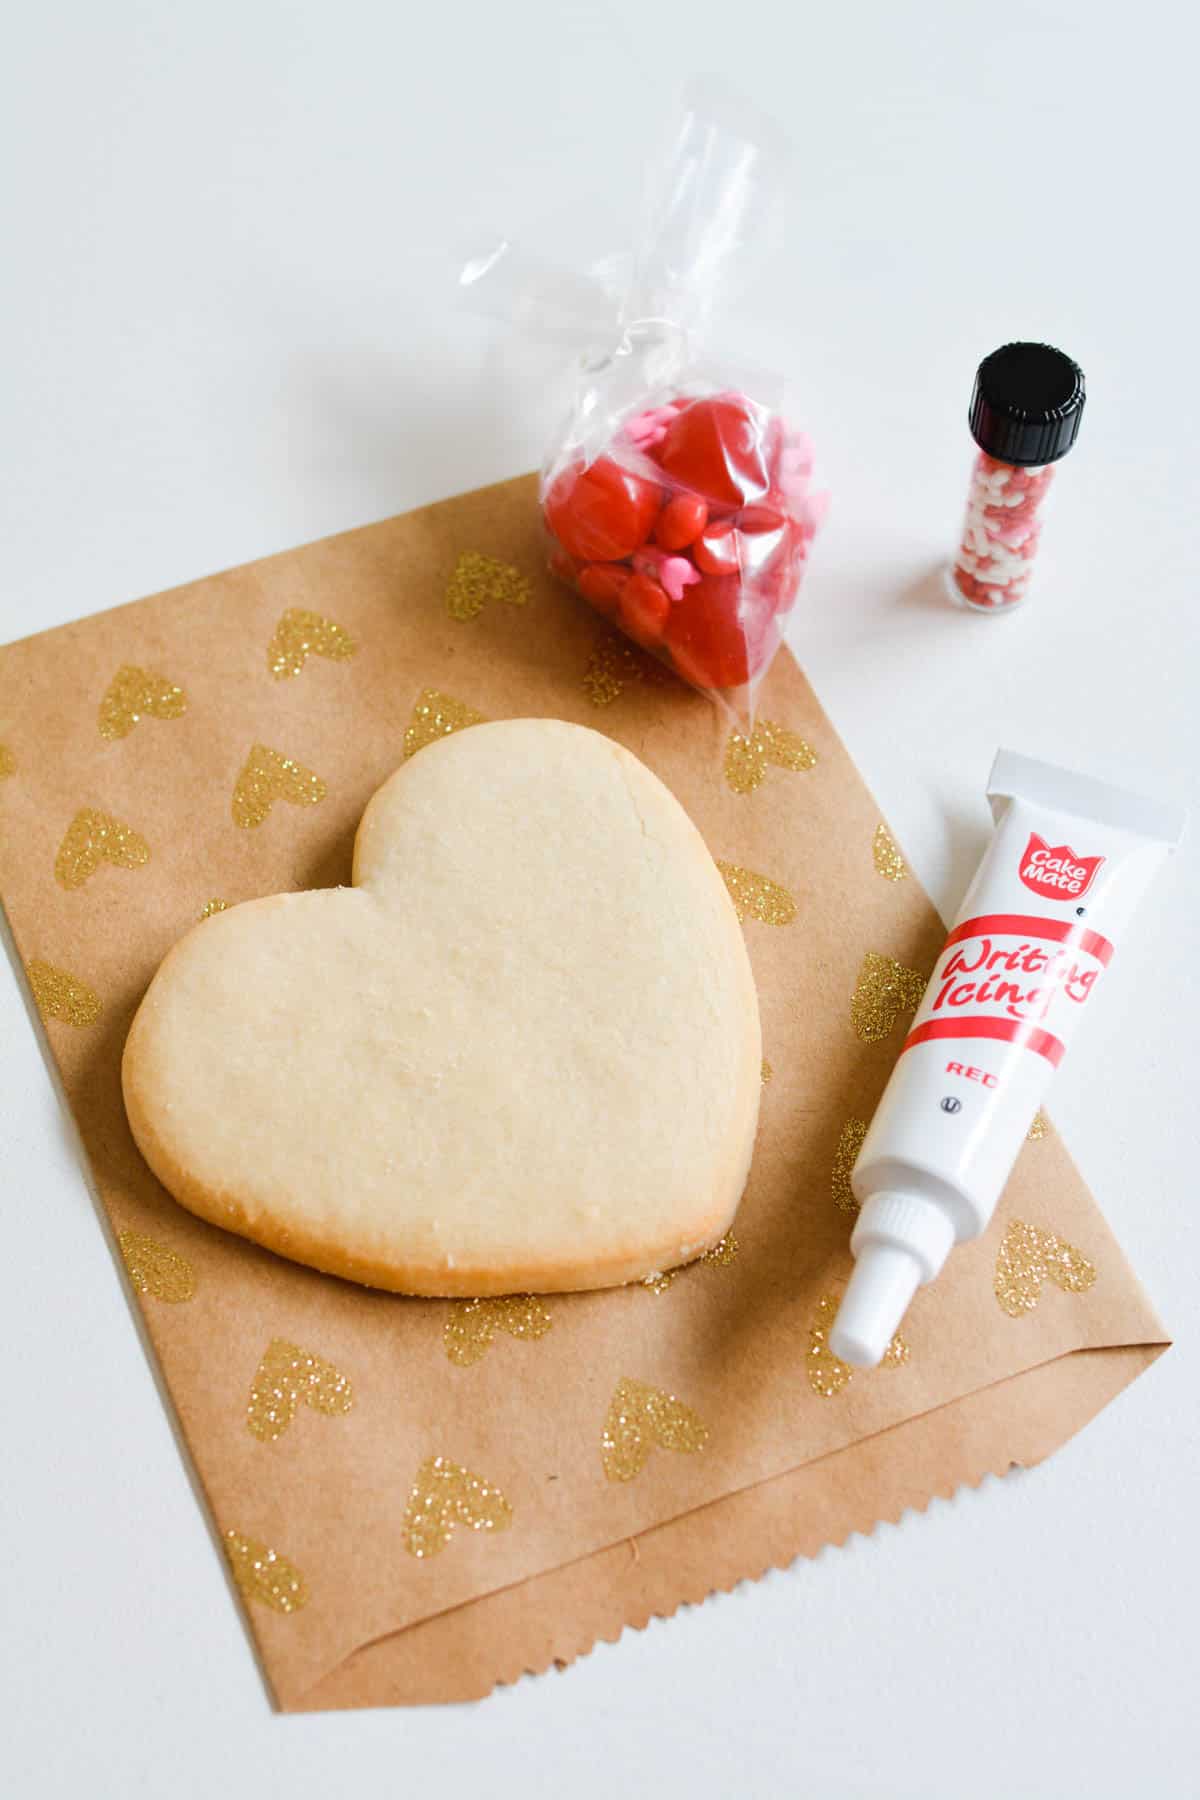 A DIY cookie decorating kit using store-bought cookies with icing and sprinkles.